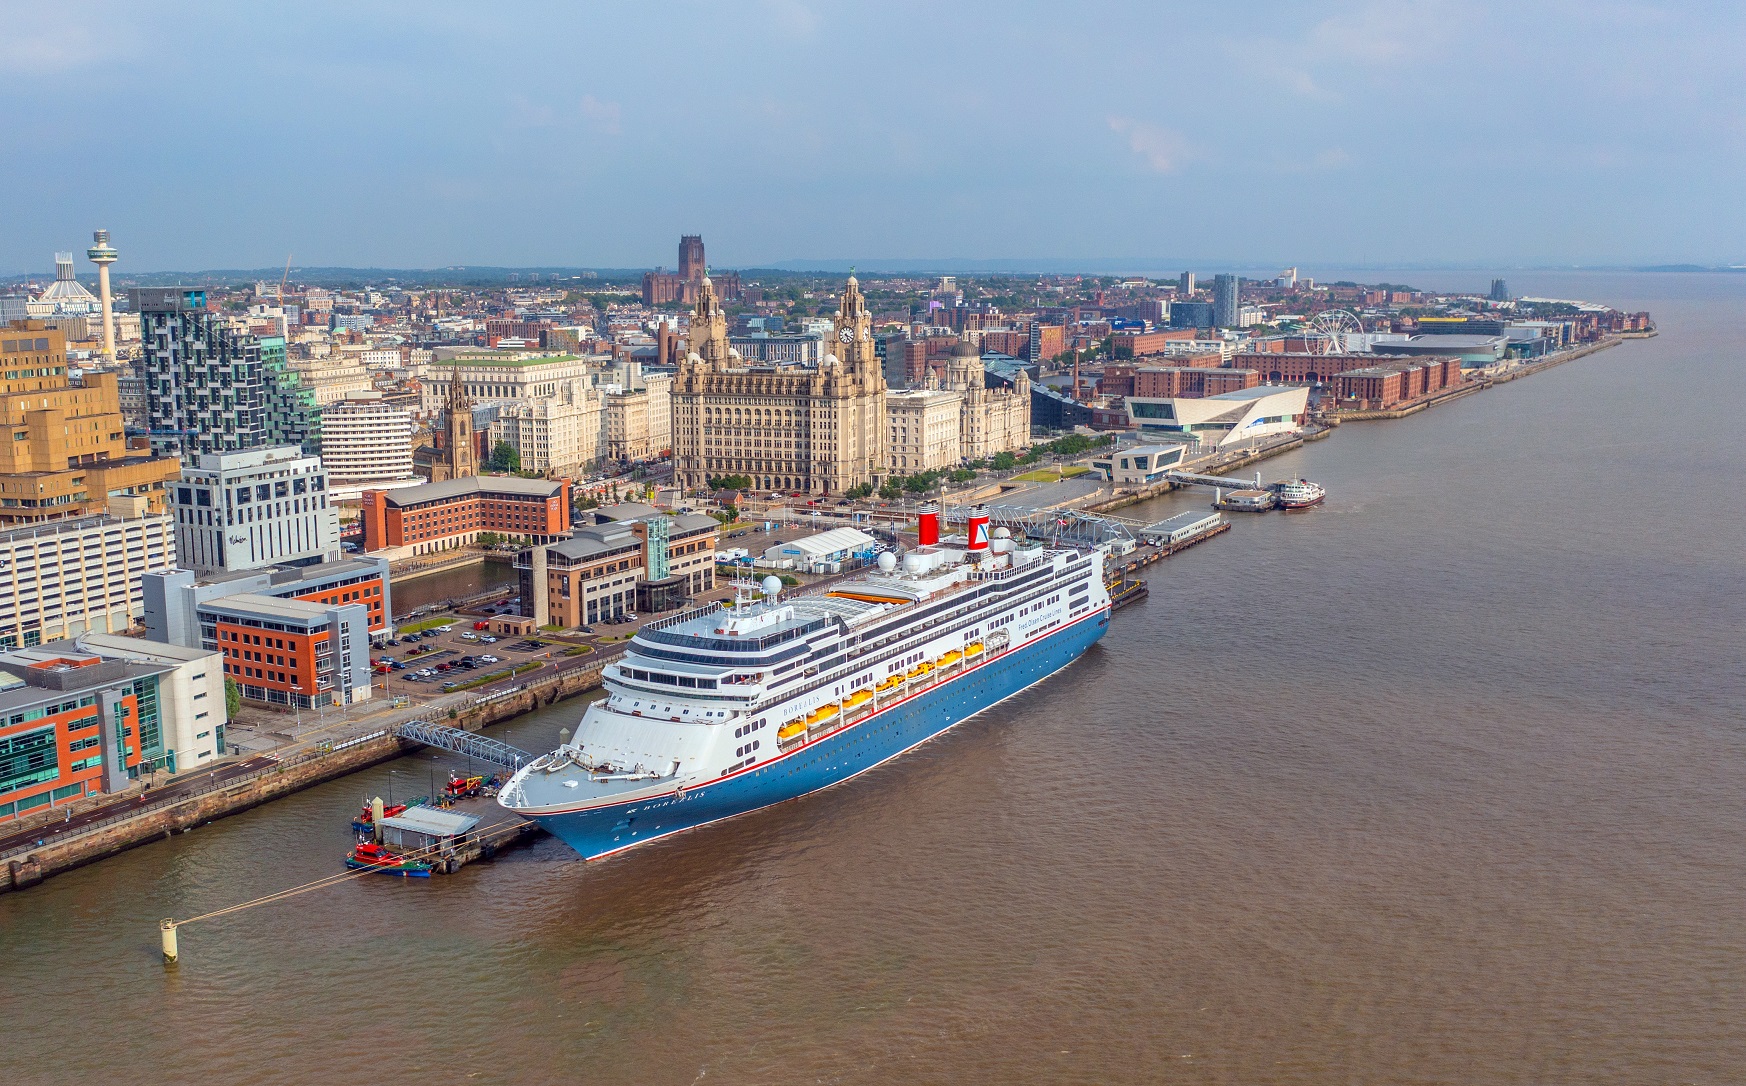 Latest News from Cruise Liverpool Liverpool's Award winning terminal